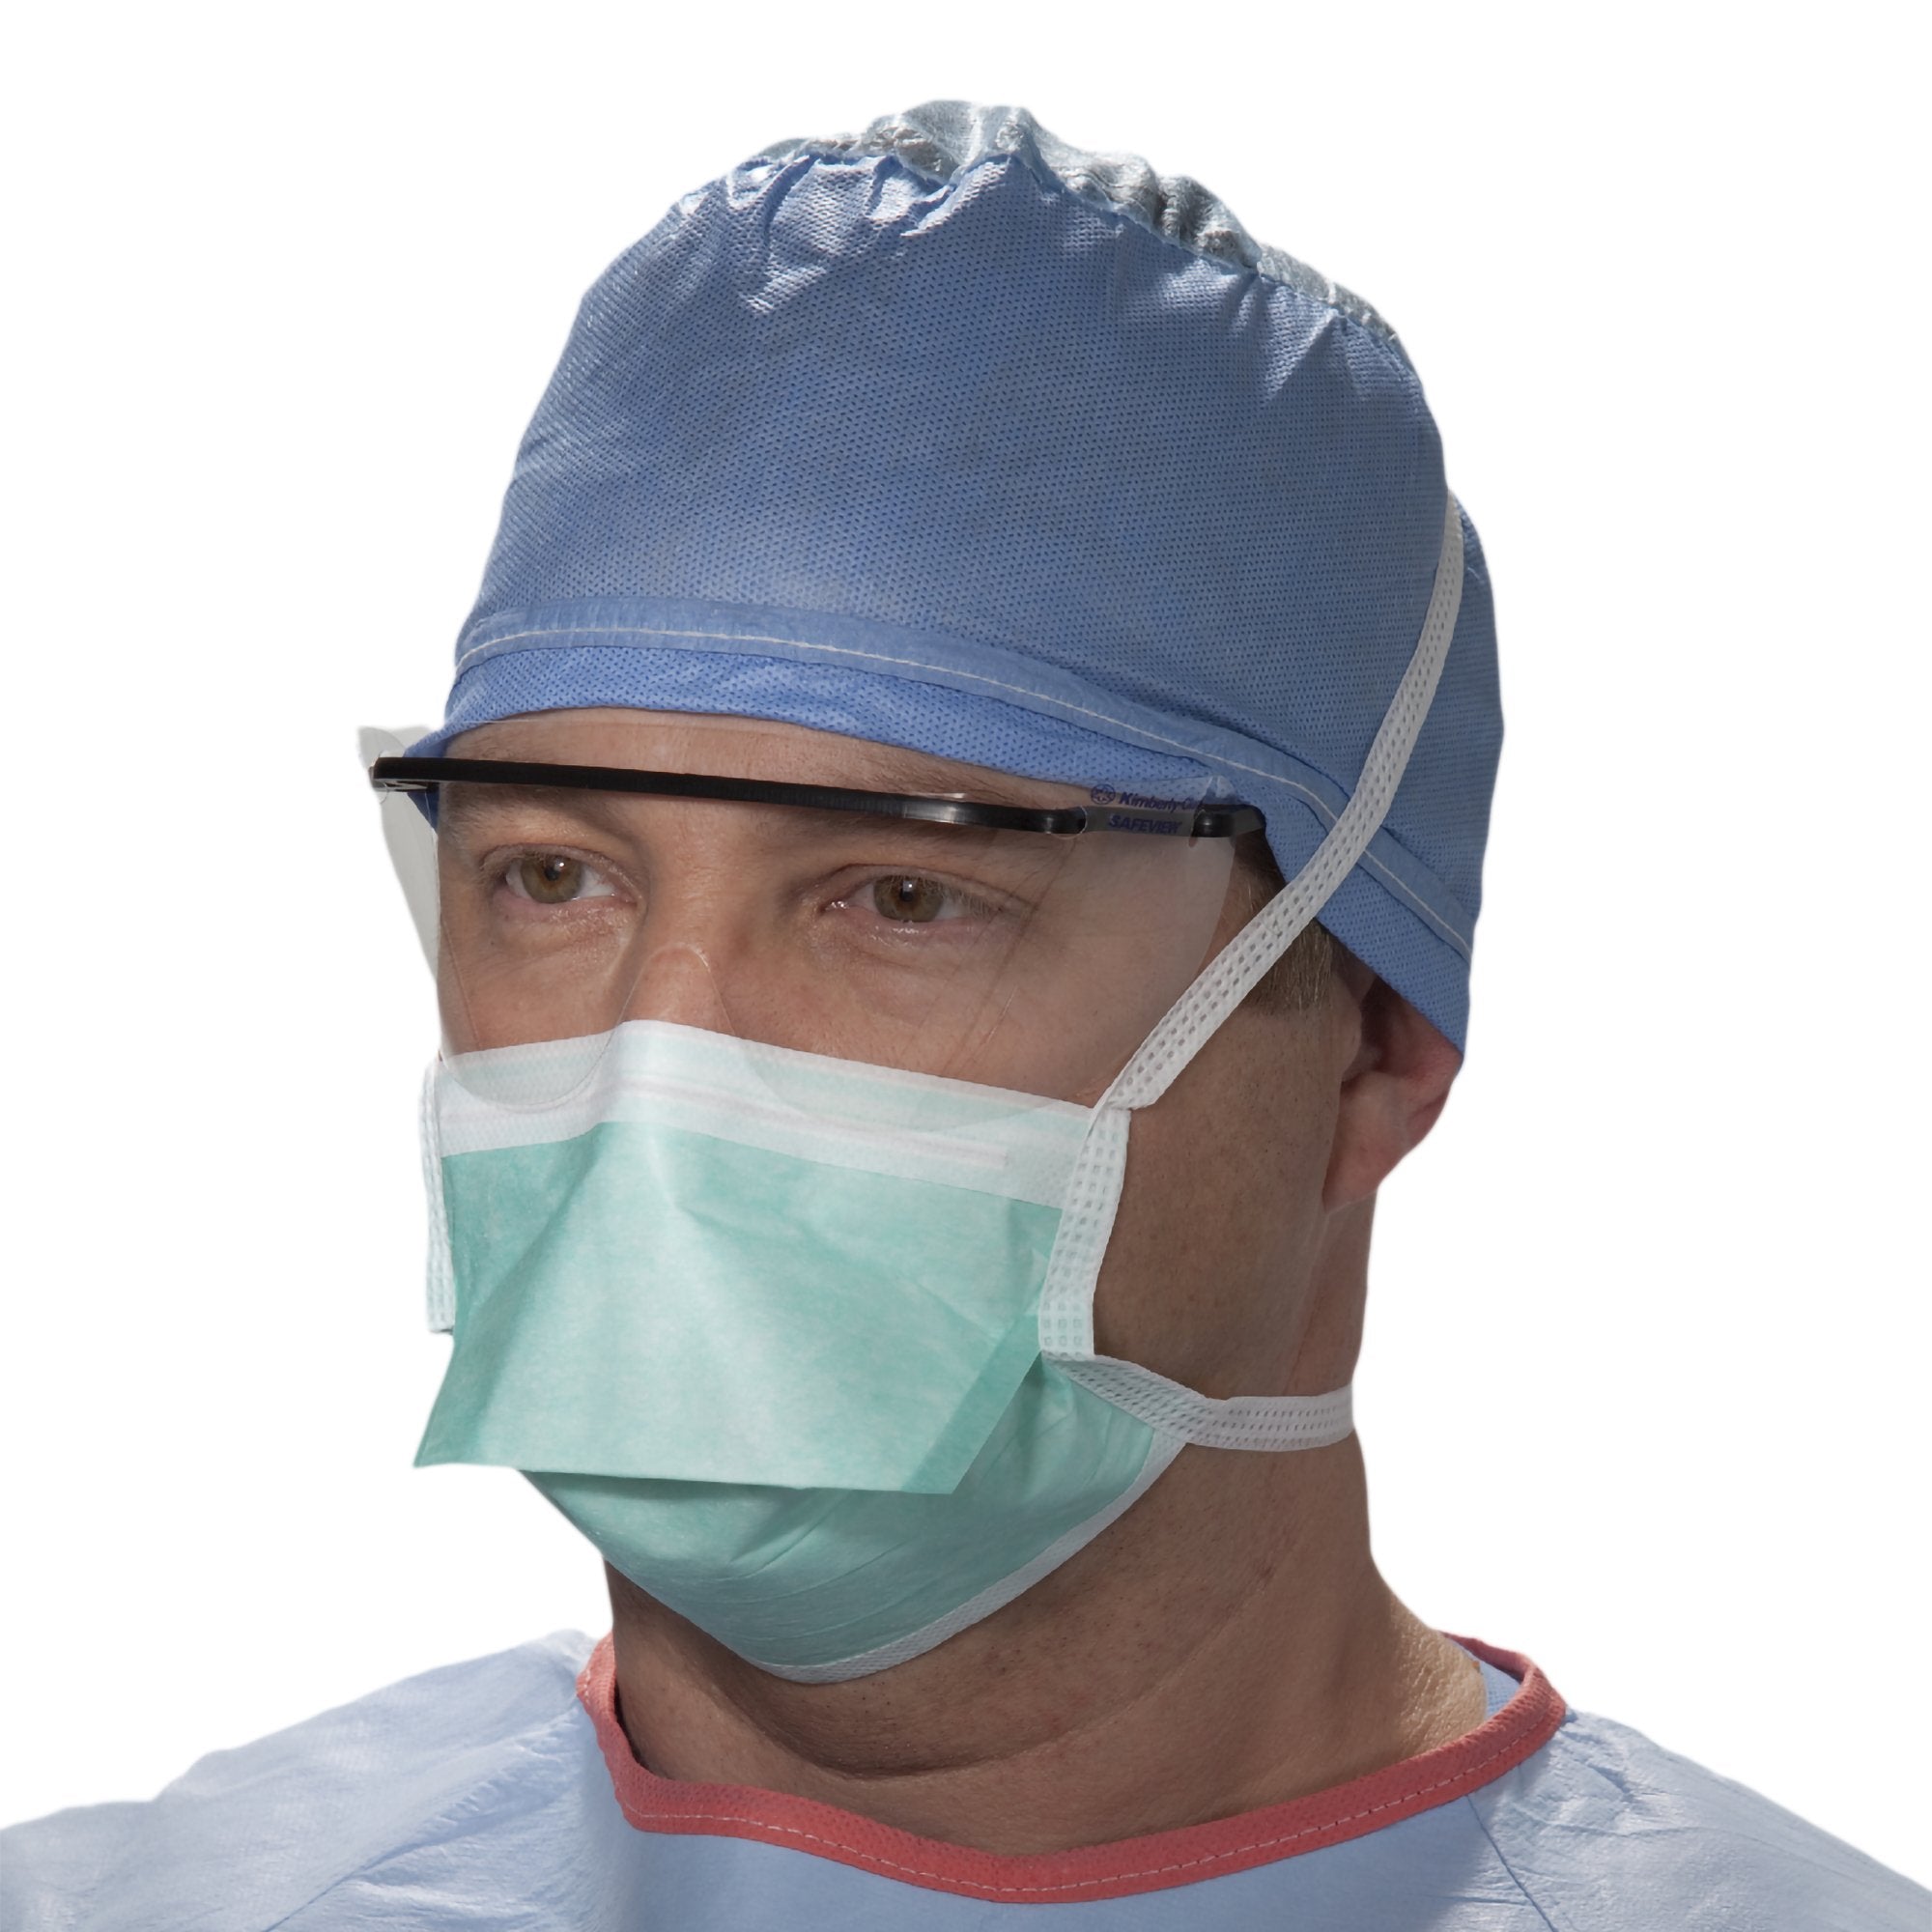 Surgical Mask Halyard Duckbill Tie Closure One Size Fits Most Green NonSterile Not Rated Adult